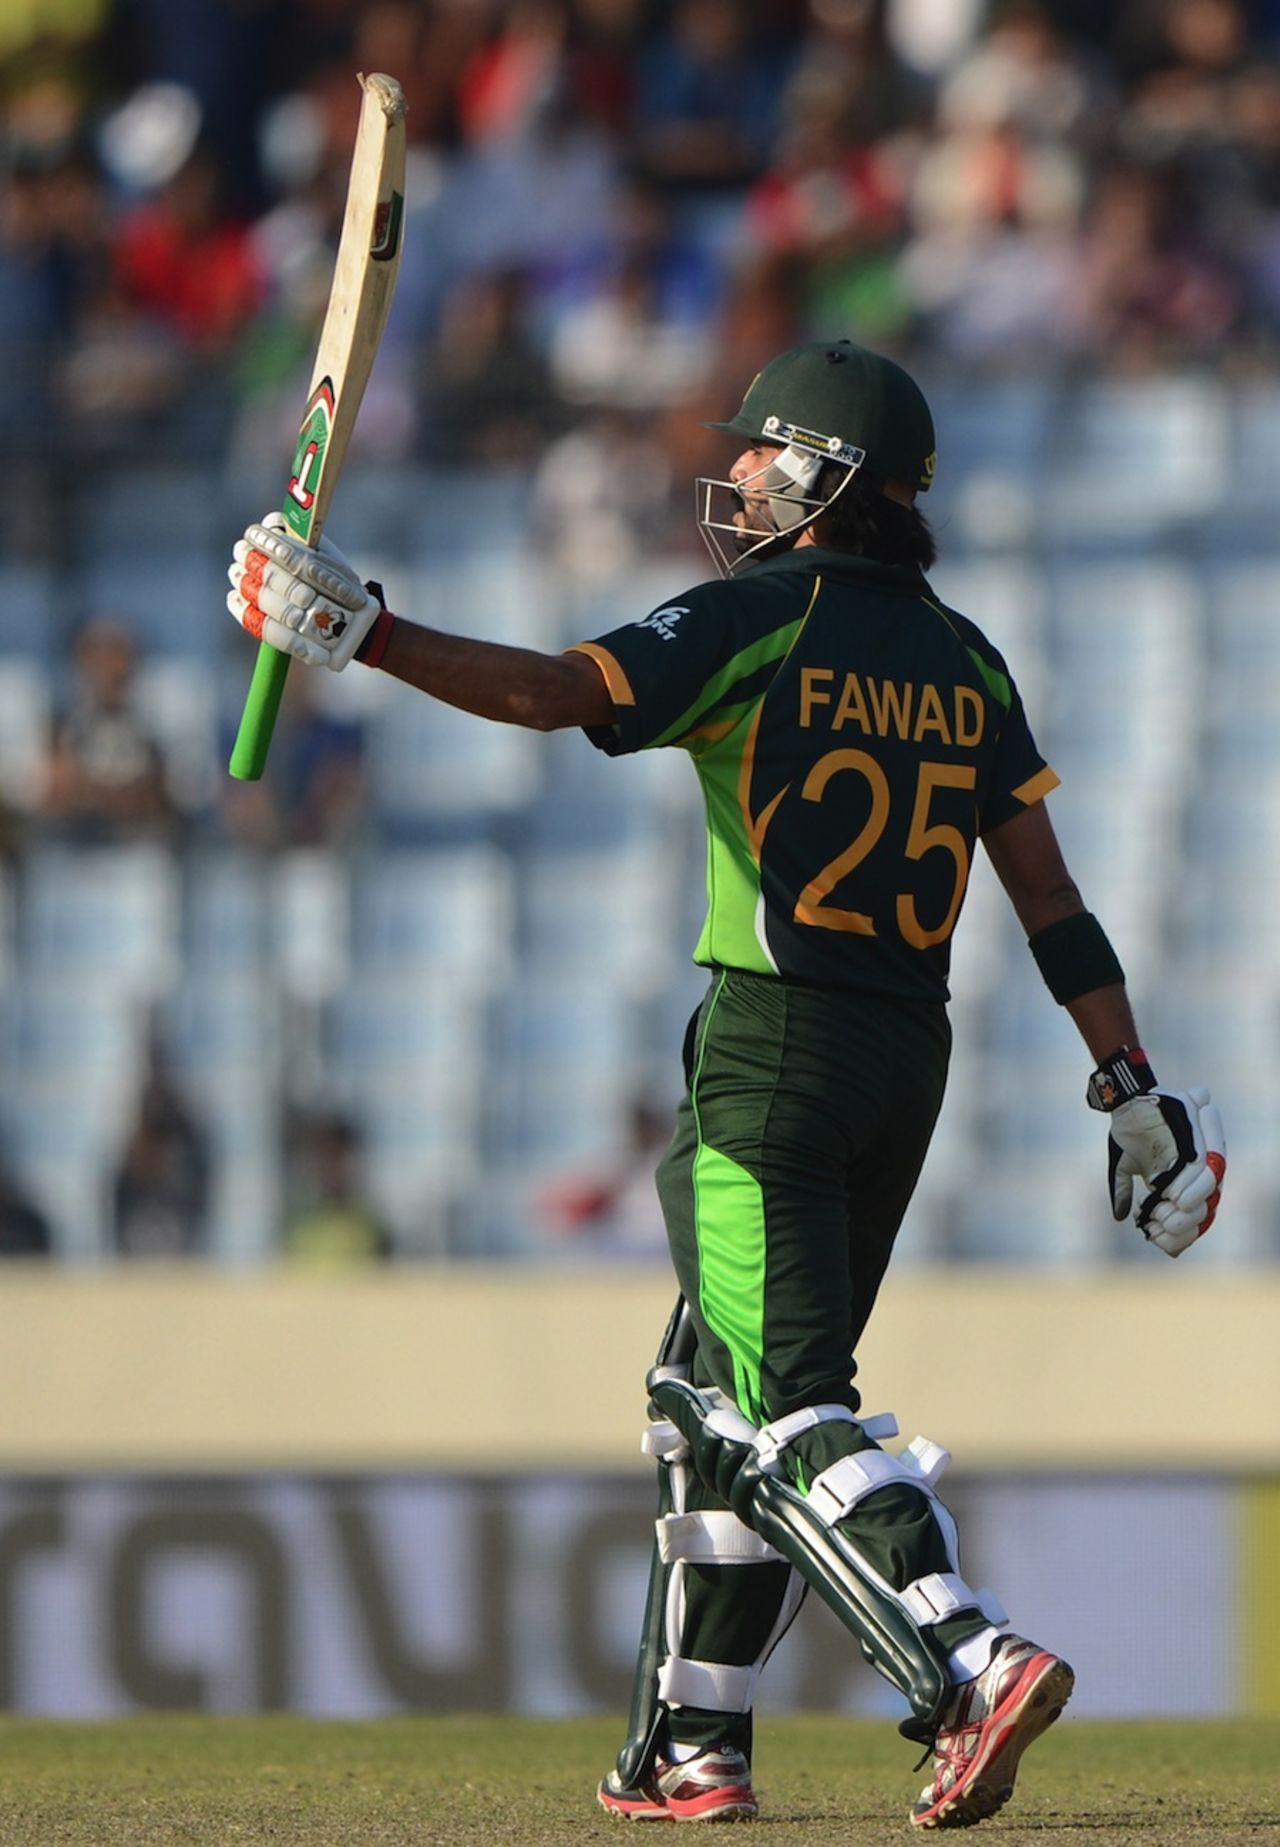 Fawad Alam gestures after bringing up his fifty, Pakistan v Sri Lanka, Asia Cup final, Mirpur, March 8, 2014